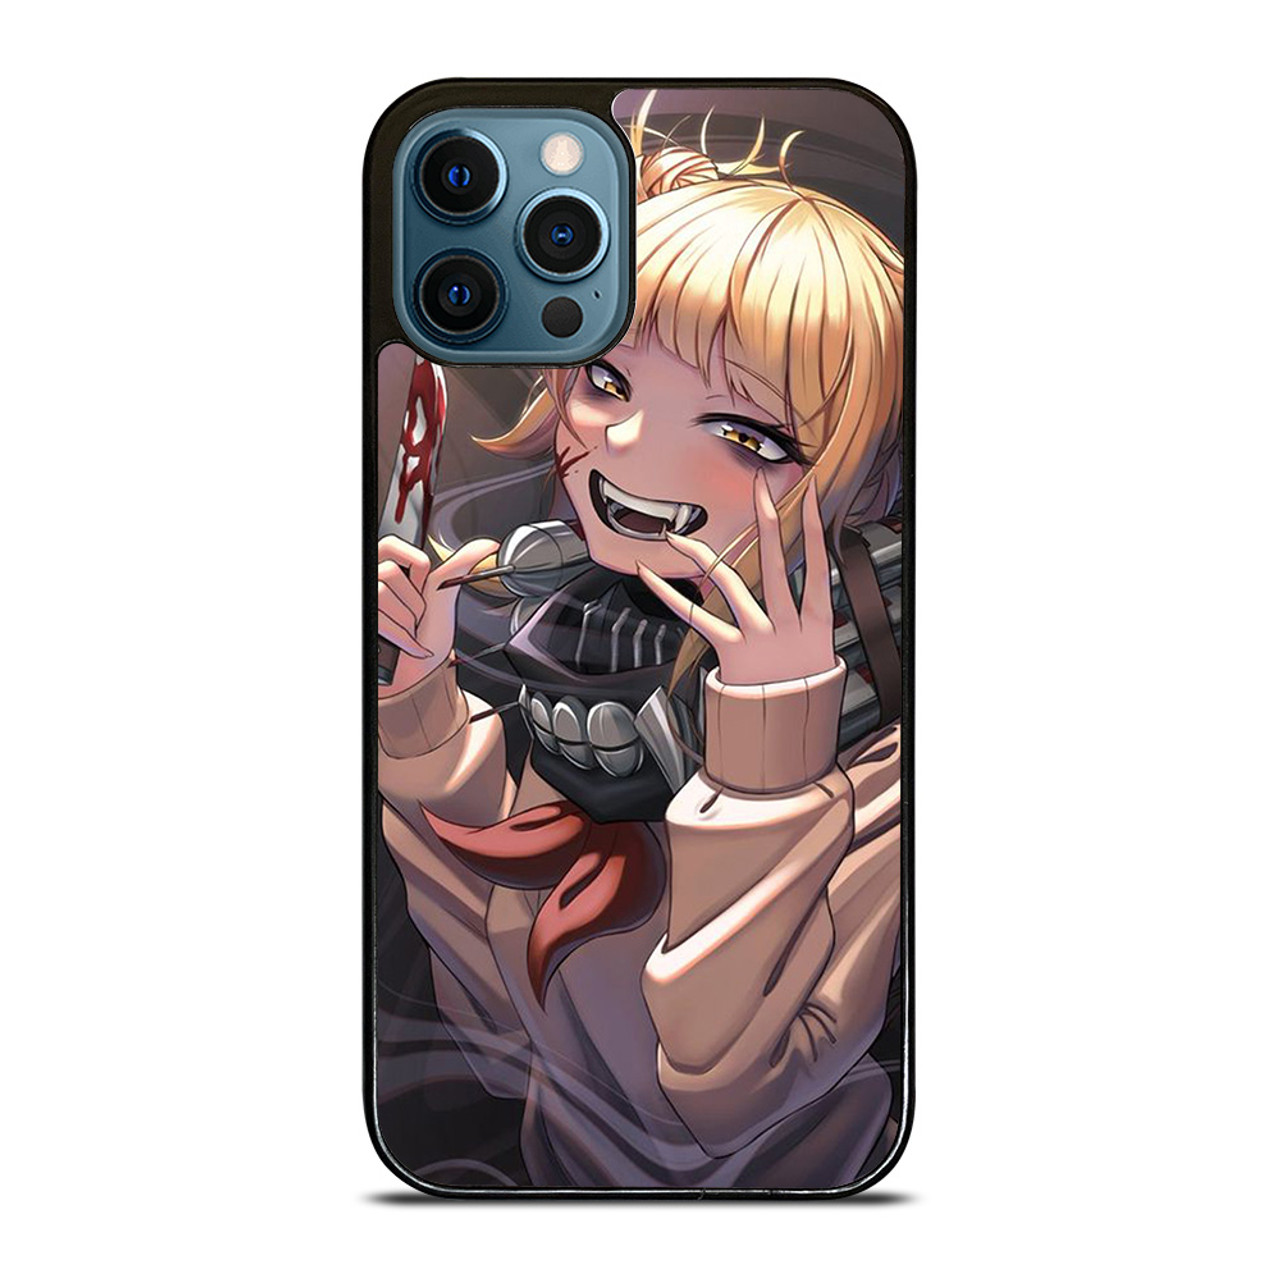 Himiko Toga Anime Girl Paint By Numbers - Numeral Paint Kit